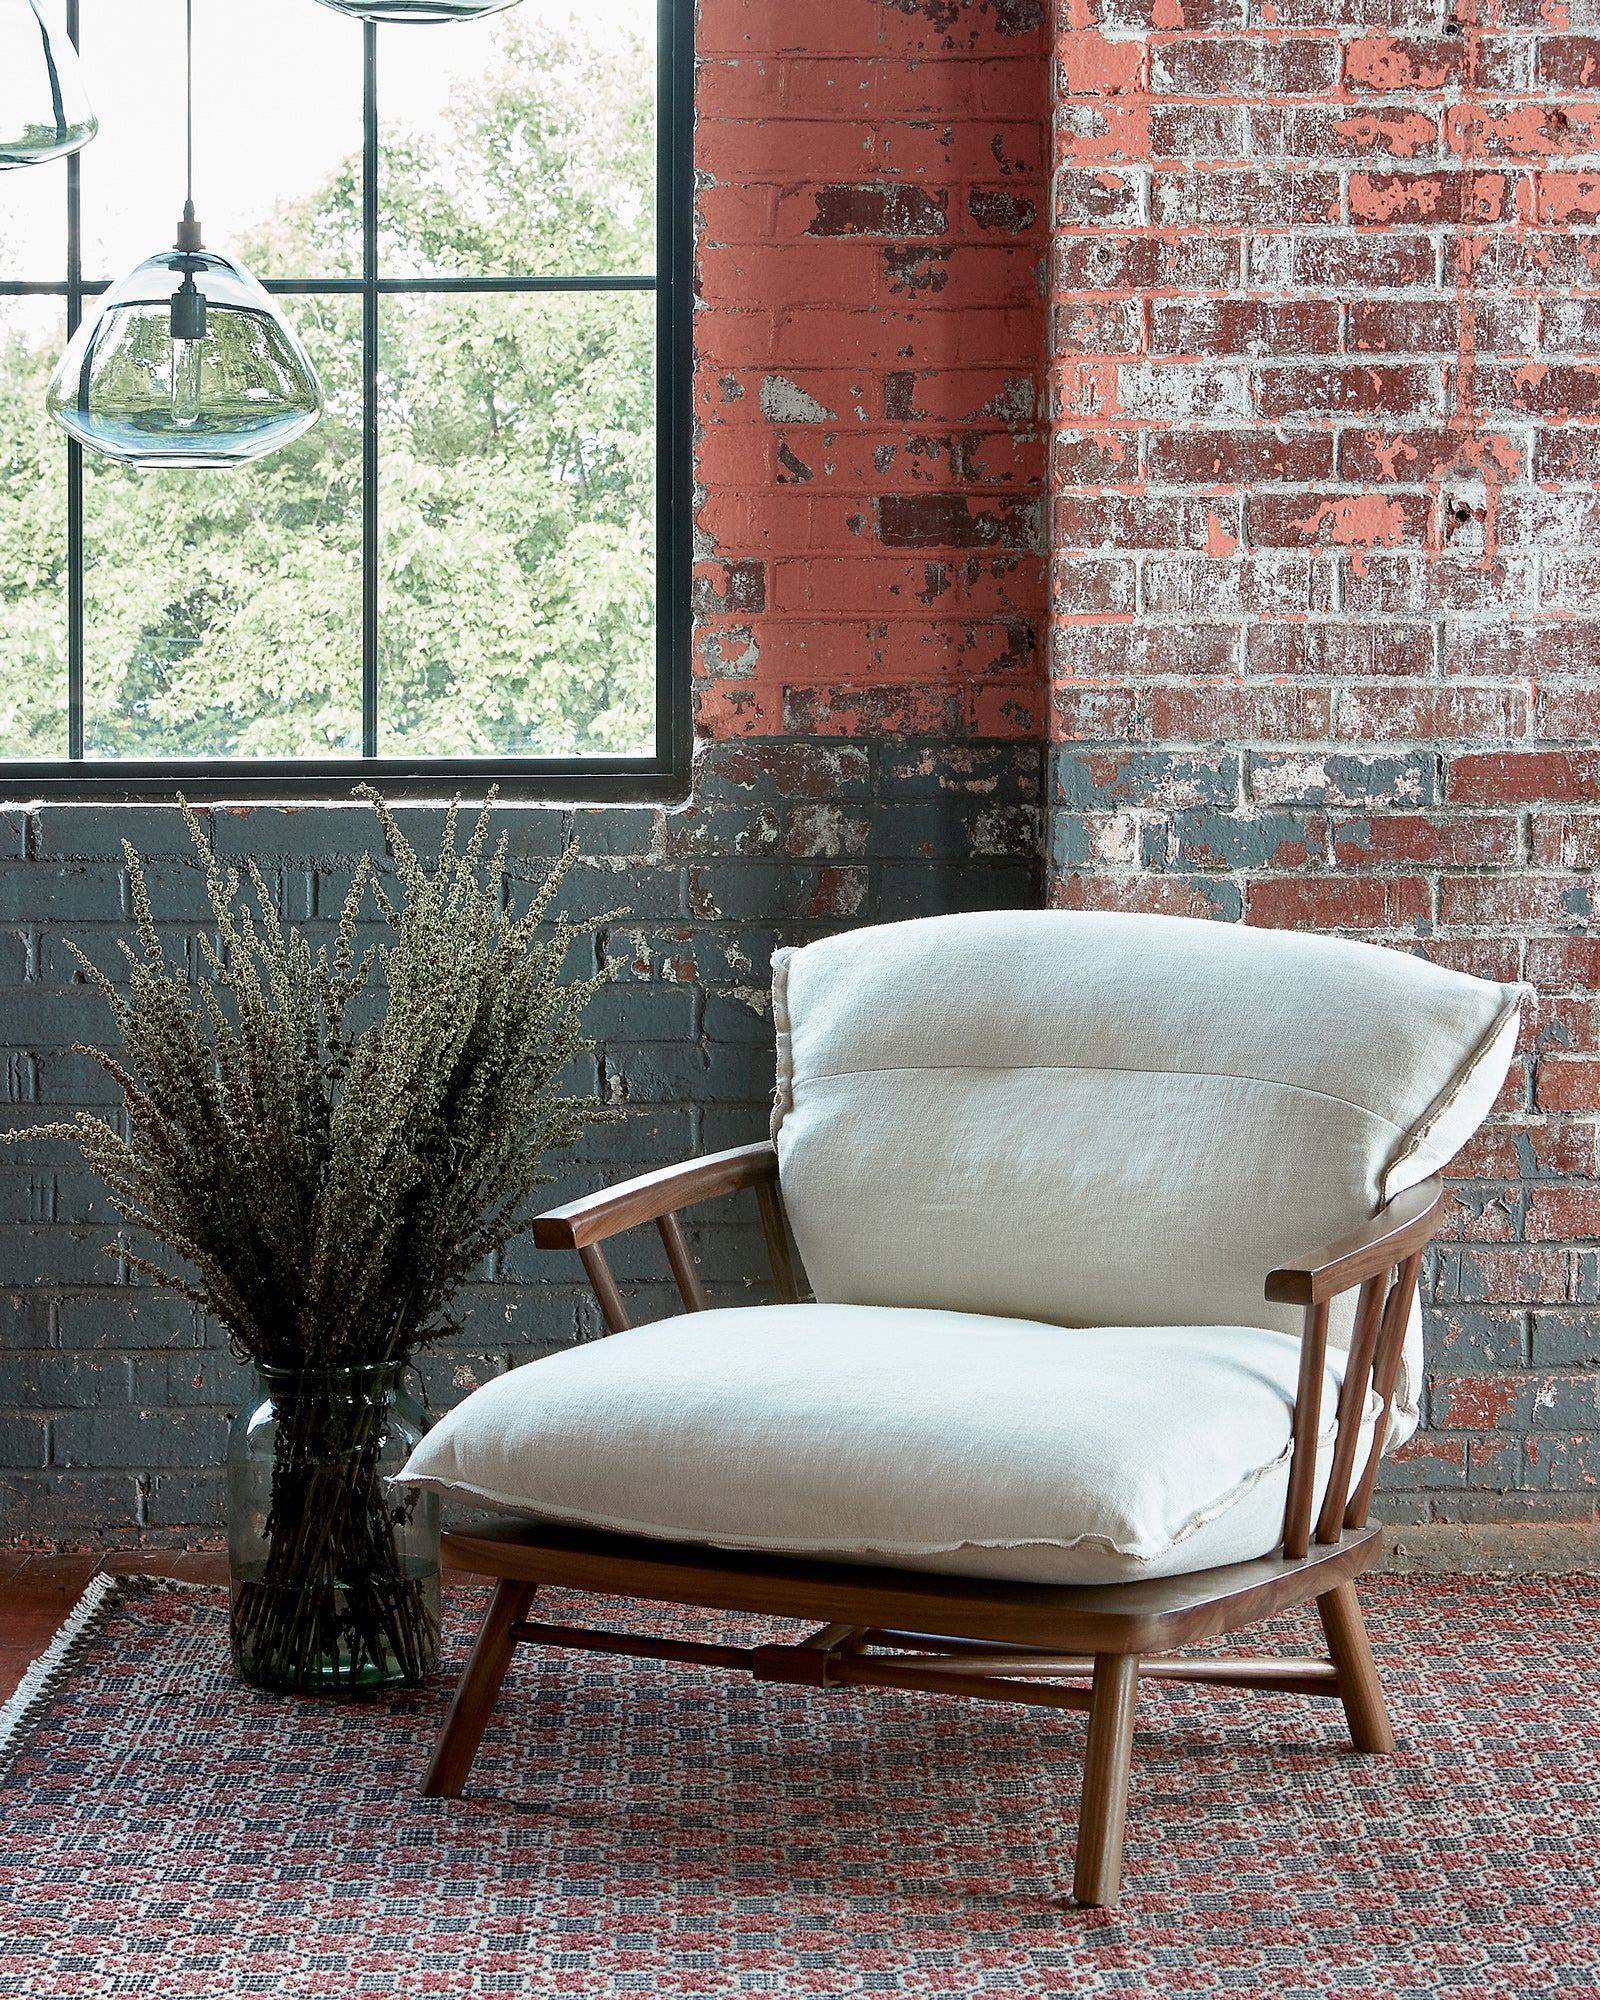  Chair with a wood frame in front of a brick wall with a vase on the floor on the left with plants. Photographed in Brevard Birch. 